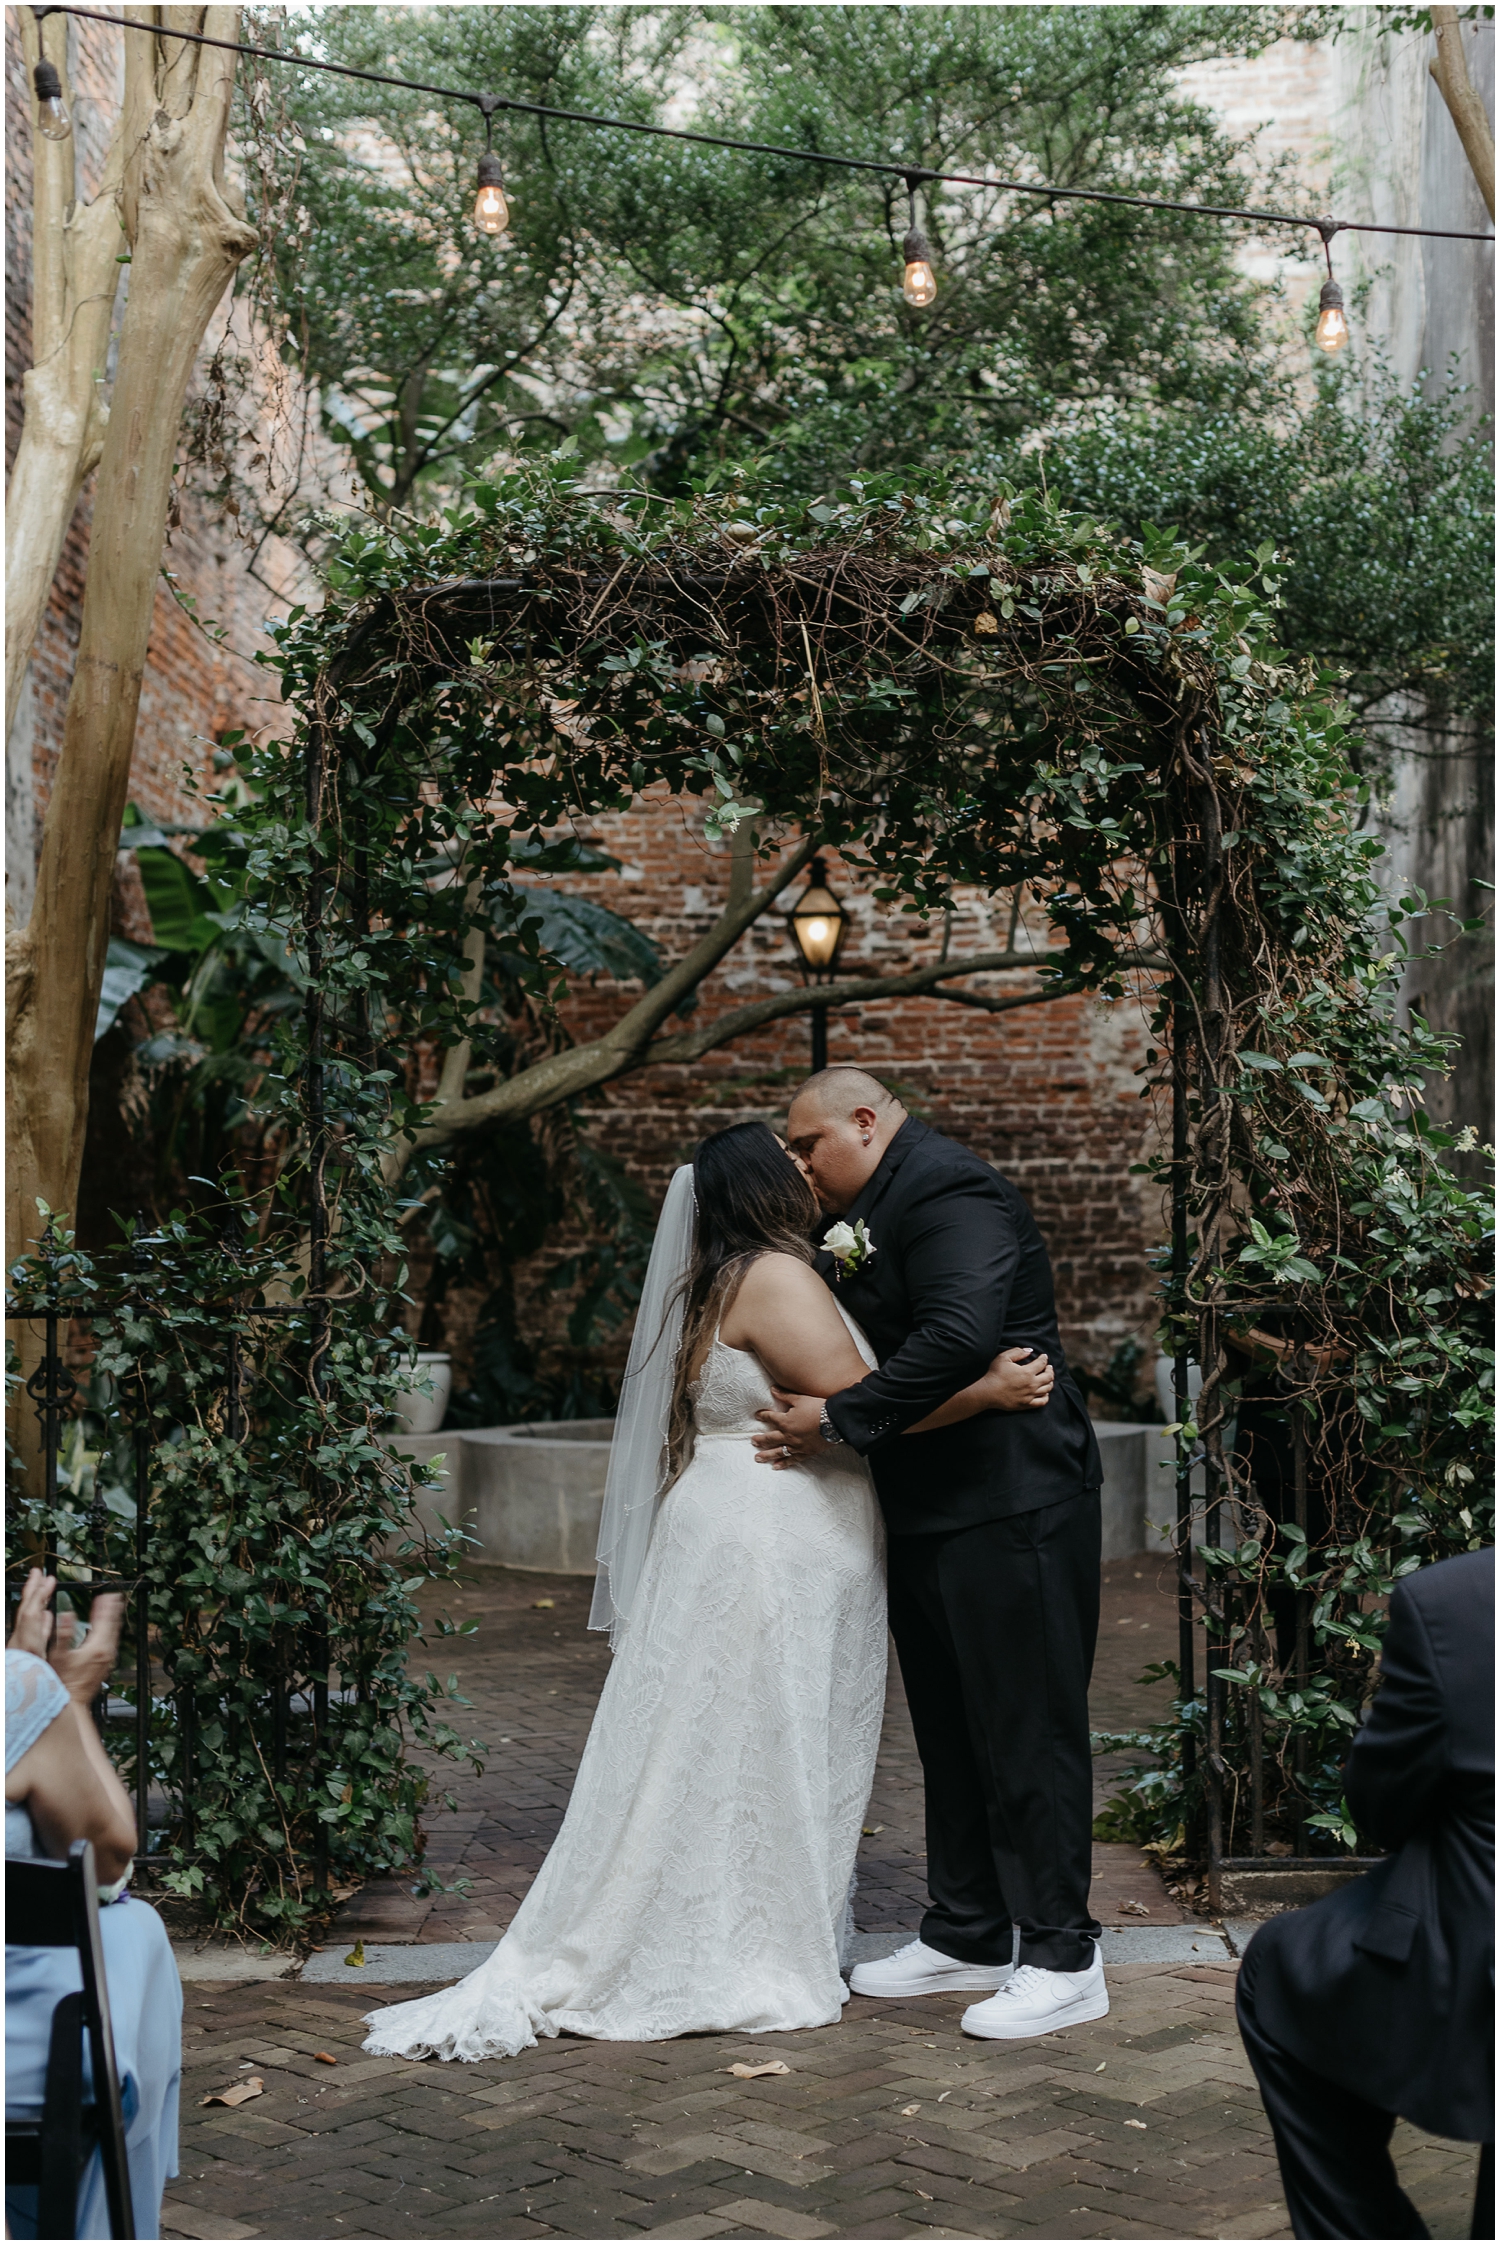 A man and woman kiss under an arch at their micro wedding.